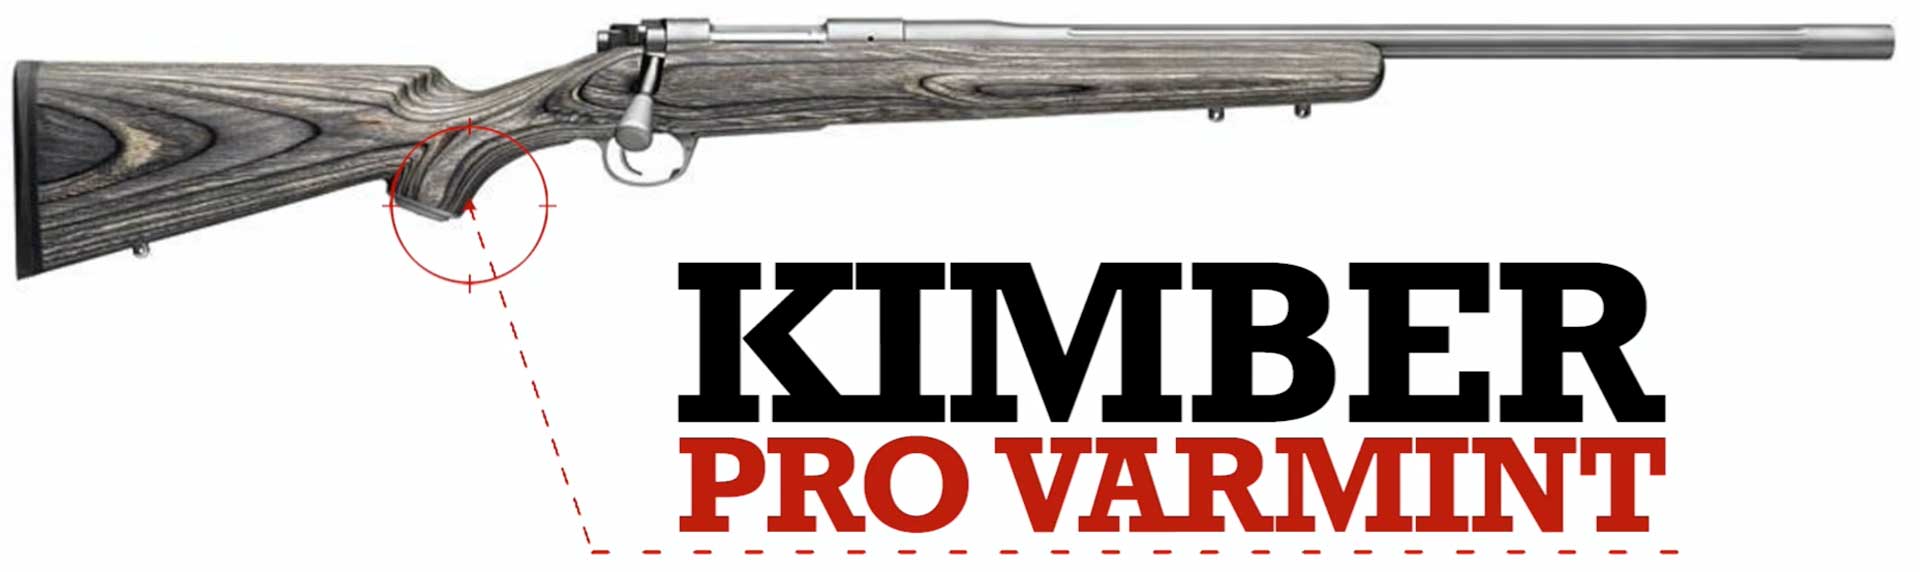 right side bolt-action rifle gray wood silver metal steel stainless text on image noting Kimber Pro Varmint